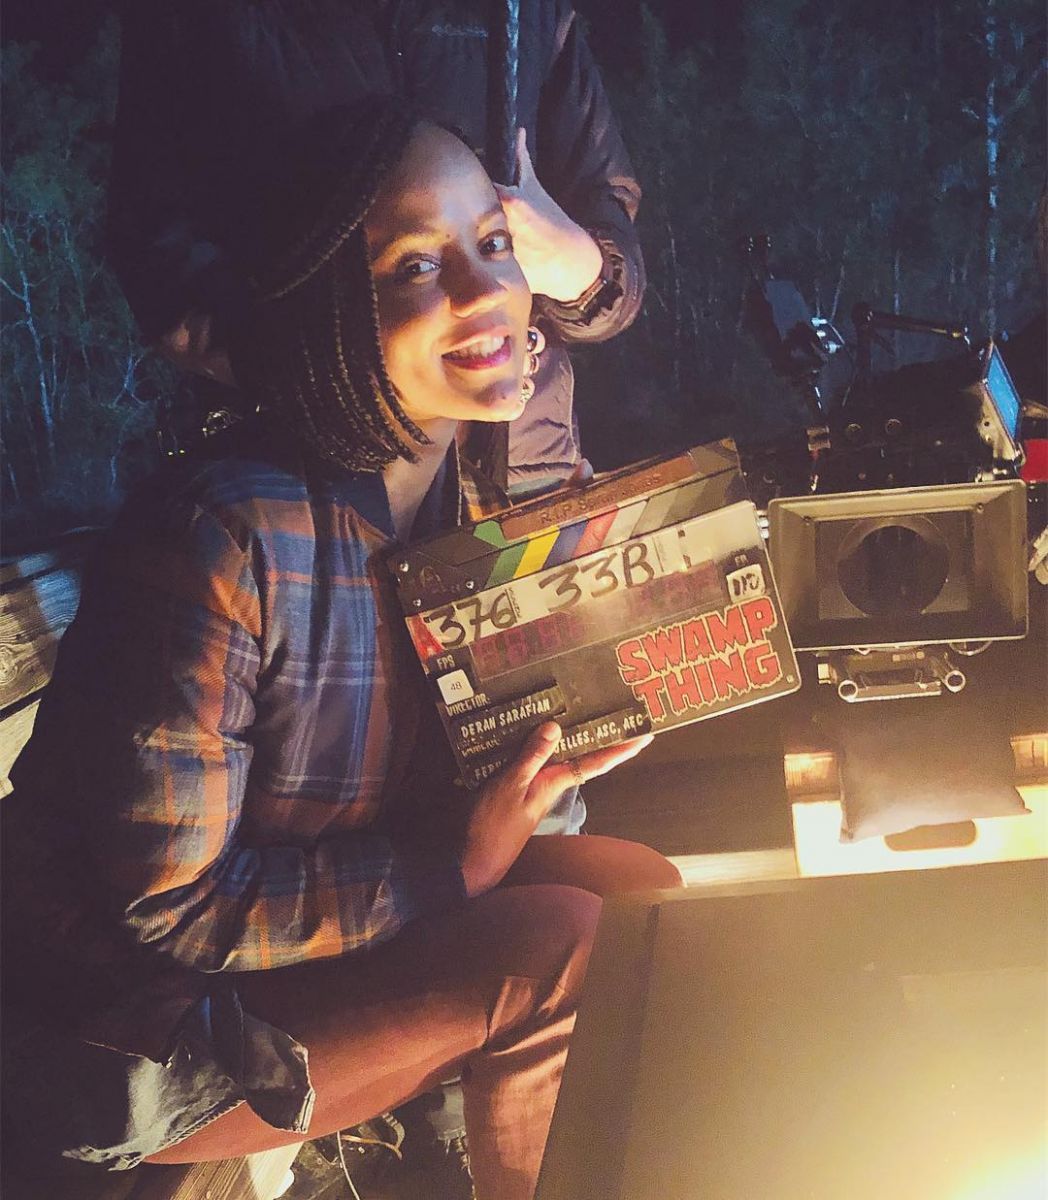 Maria Sten on the Set of Swamp Thing in 2019